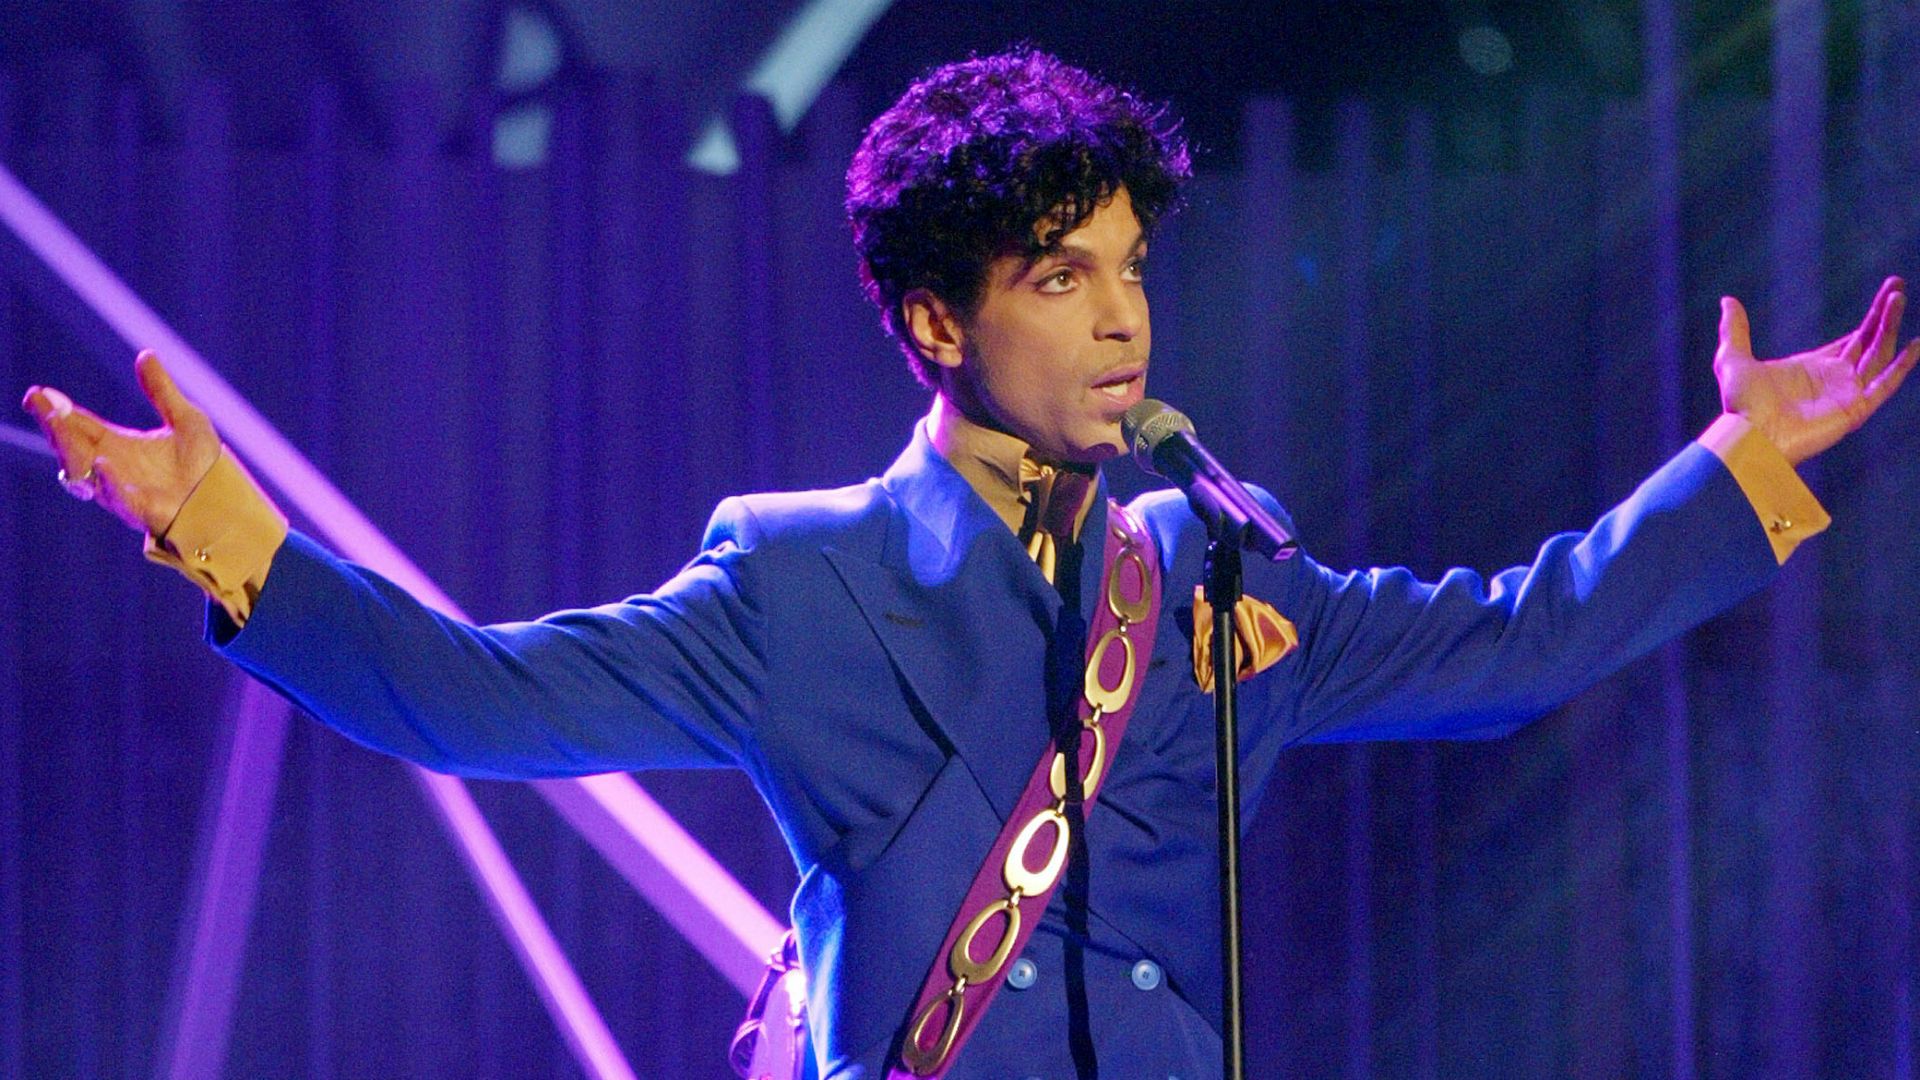 Prince was so Minnesota he recorded a fight song for the Vikings in 2010